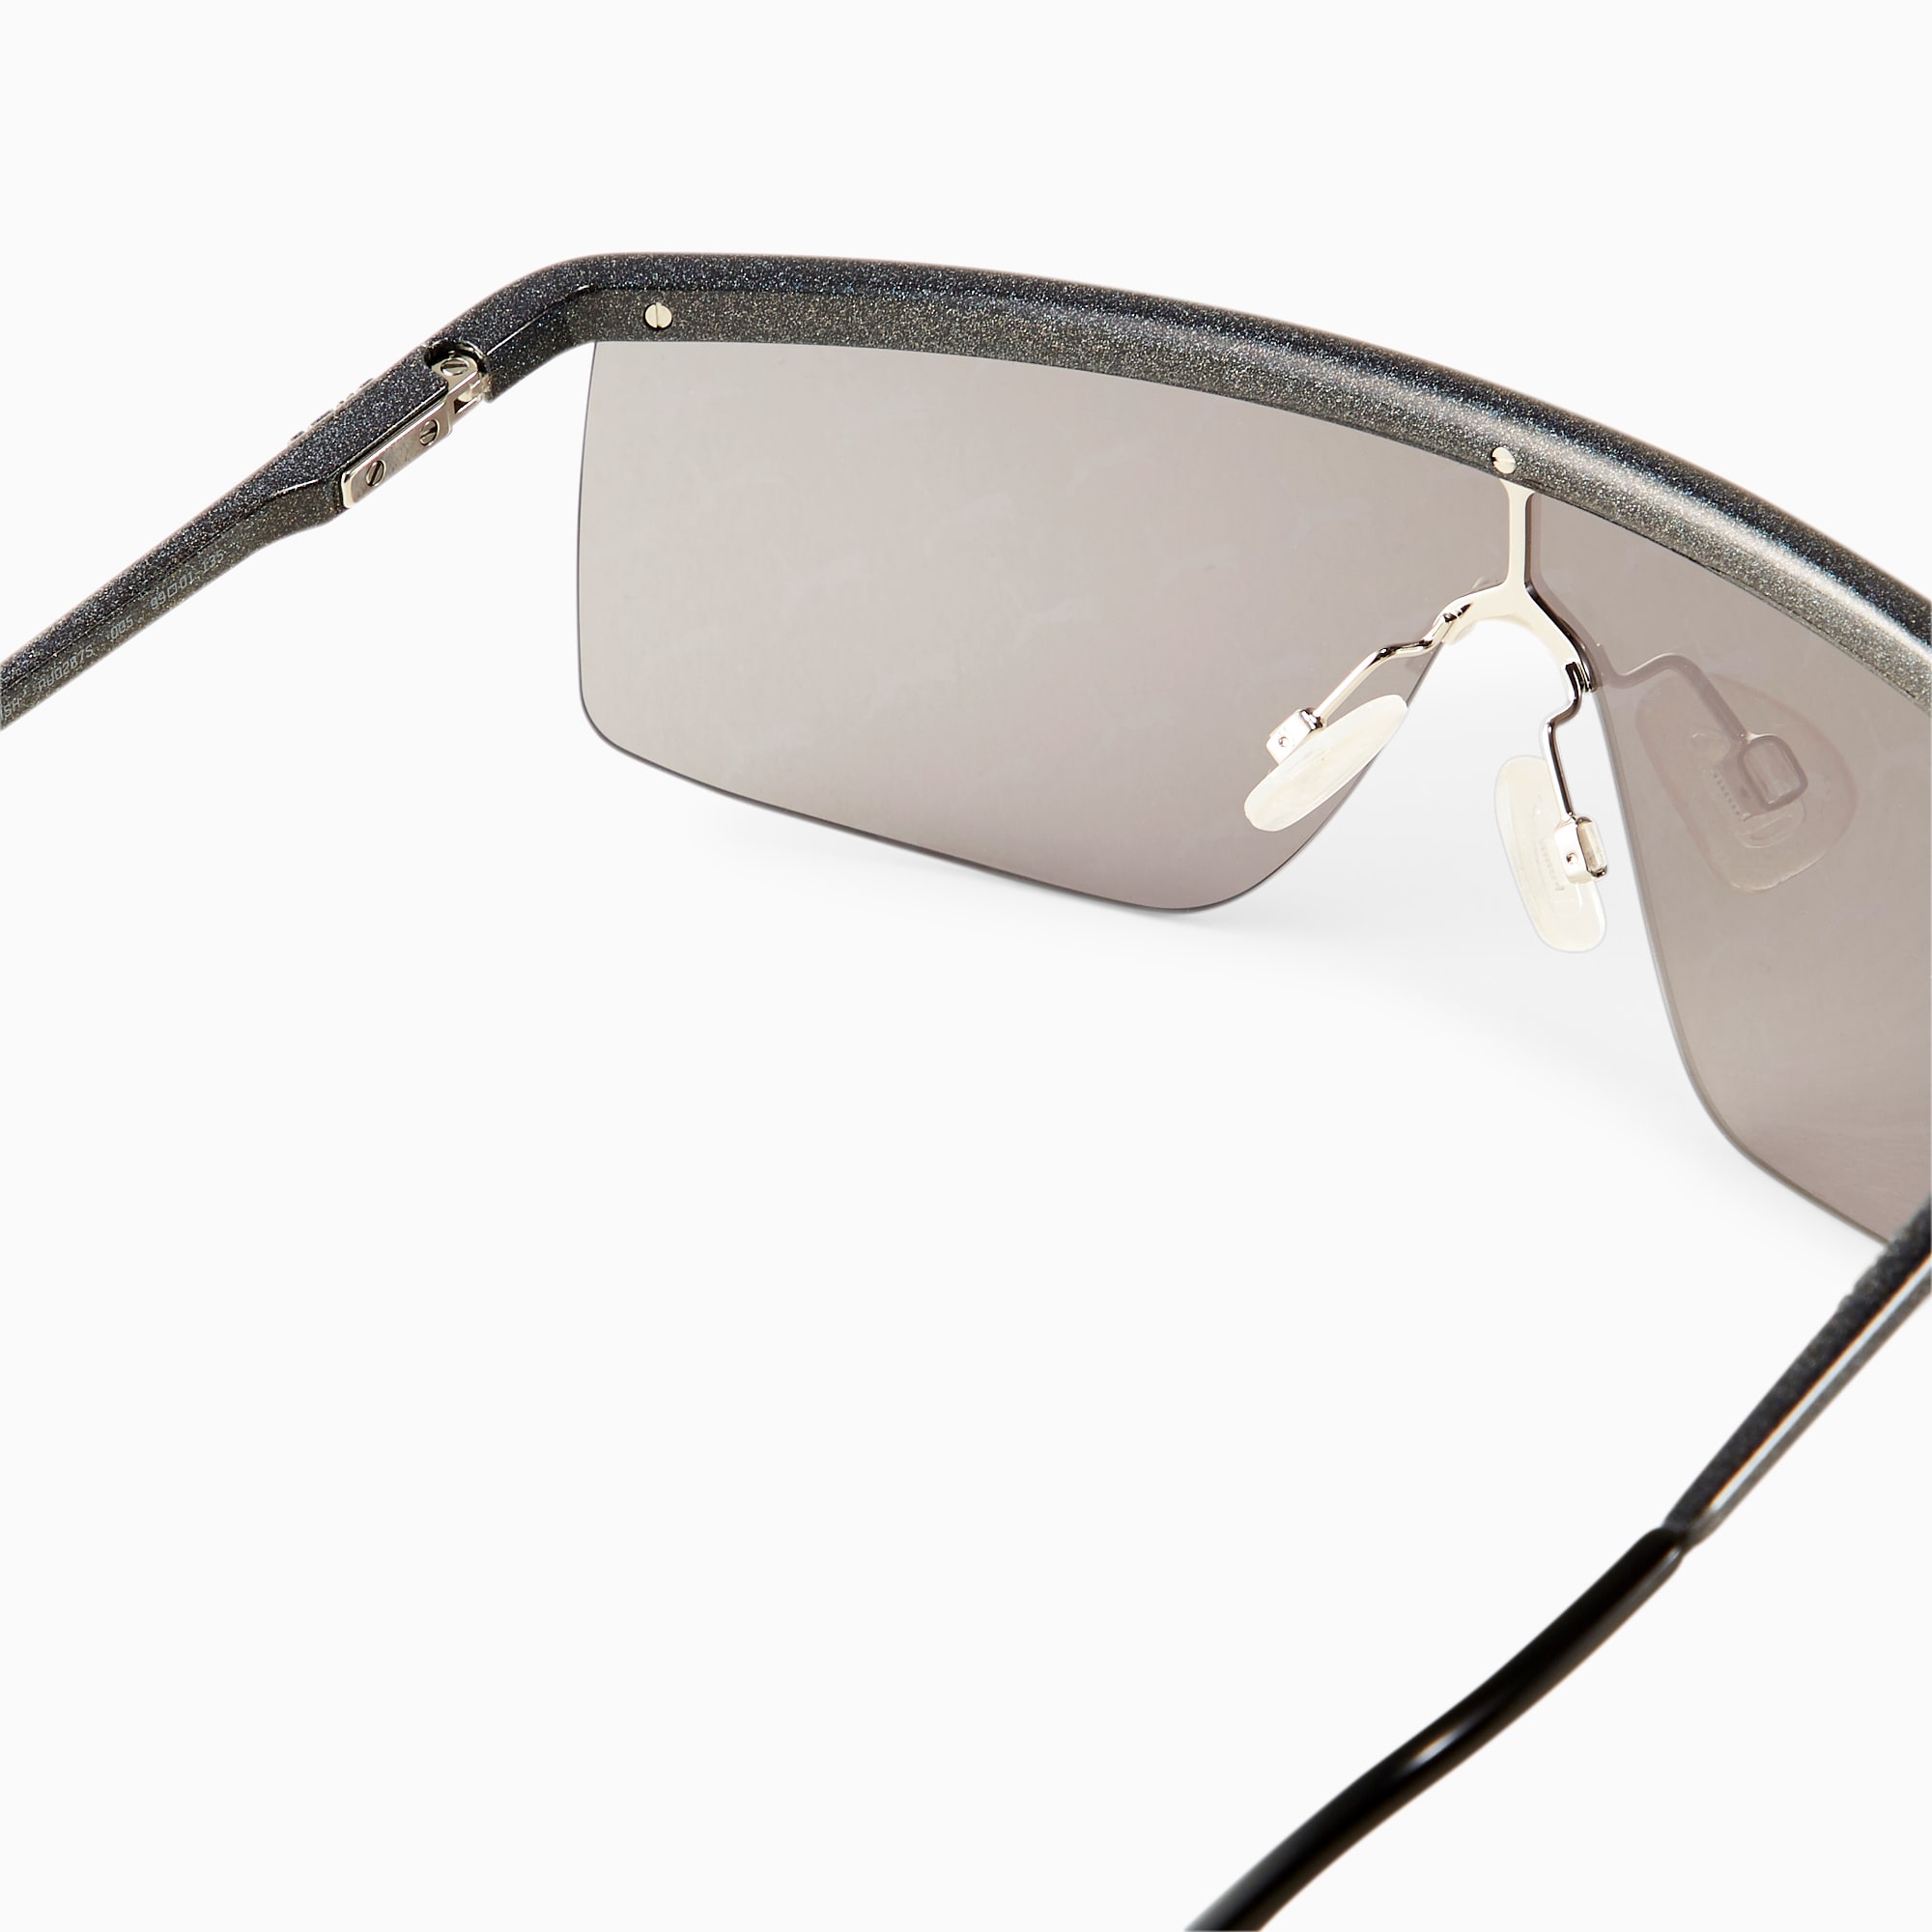 Puma launches the new Linford Christie 25th anniversary limited edition  sunglasses